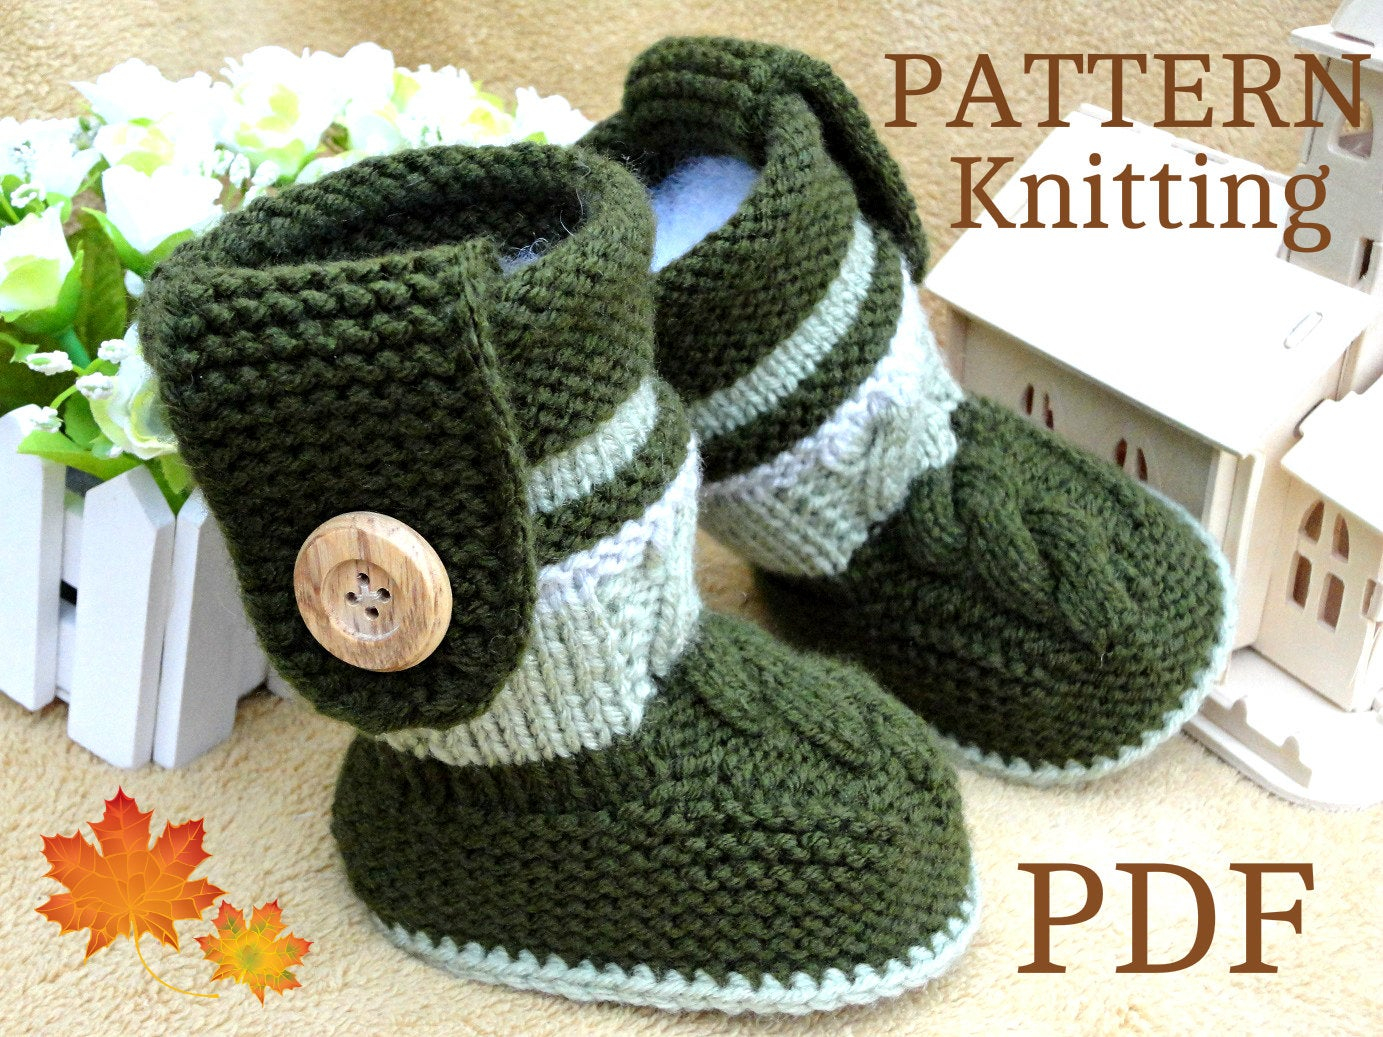 Knitting Patterns For Baby Booties Knitting Pattern Ba Booties Pattern Knit Ba Shoes Ba Boy Ba Girl Pattern Knit Ba Pattern Infant Shoes Ba Uggs Pdf File Only